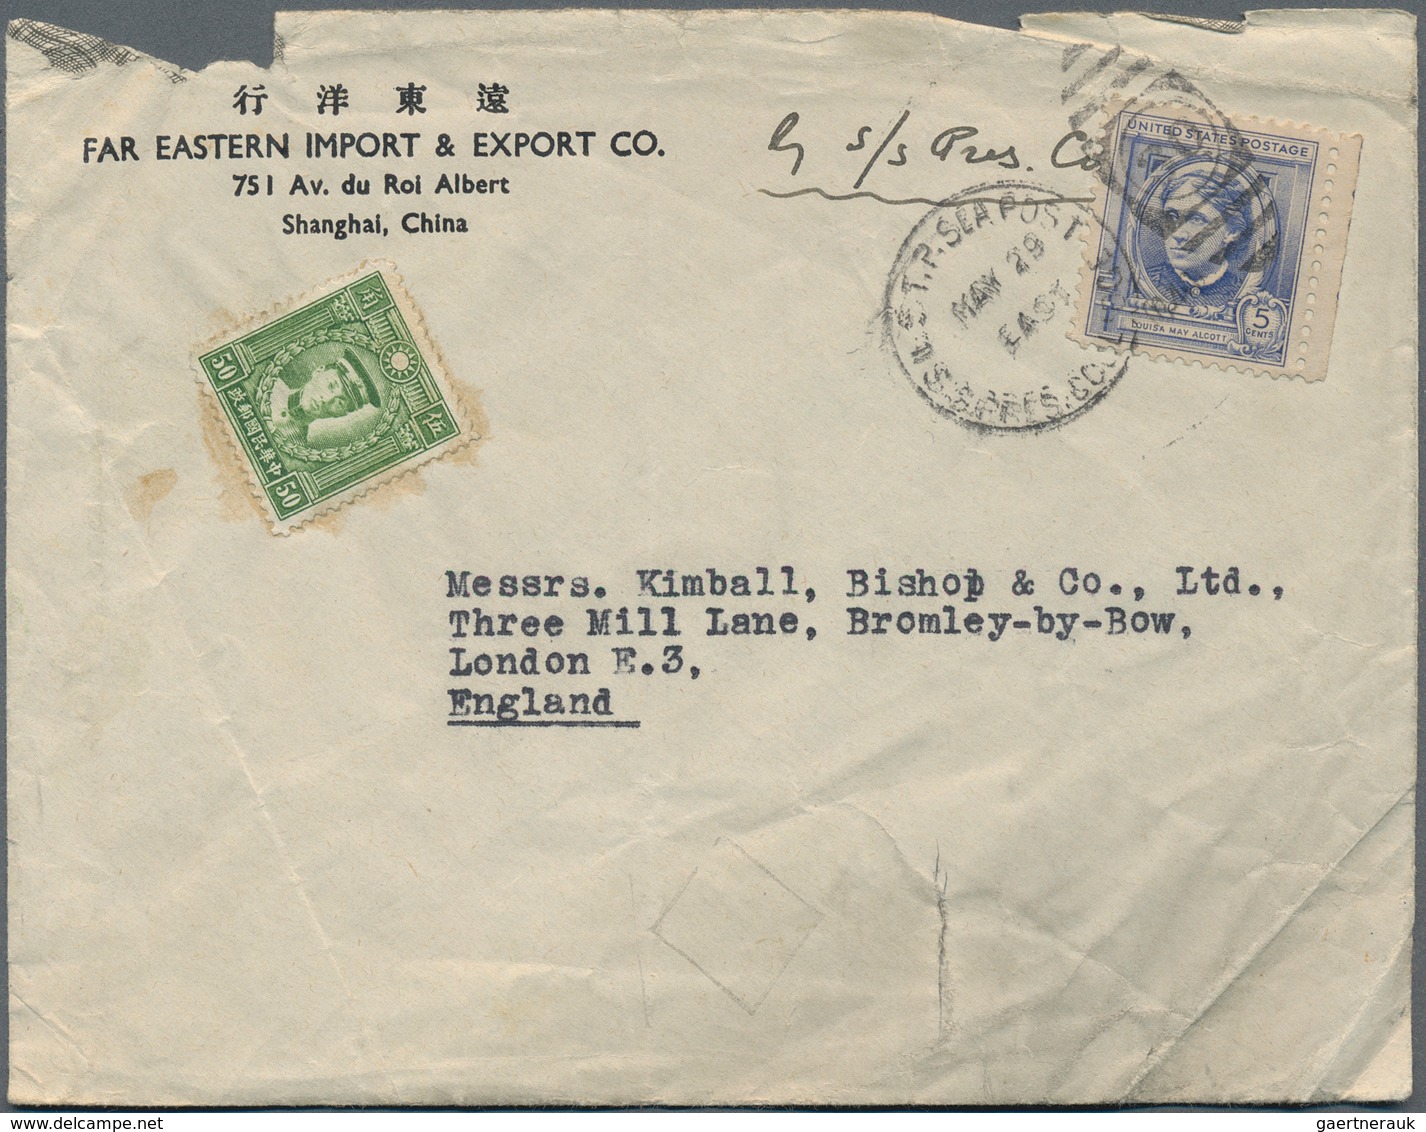 China: 1905/1953, ca. 180 covers and cards in 1 white box, mostly Republican commercial covers, but